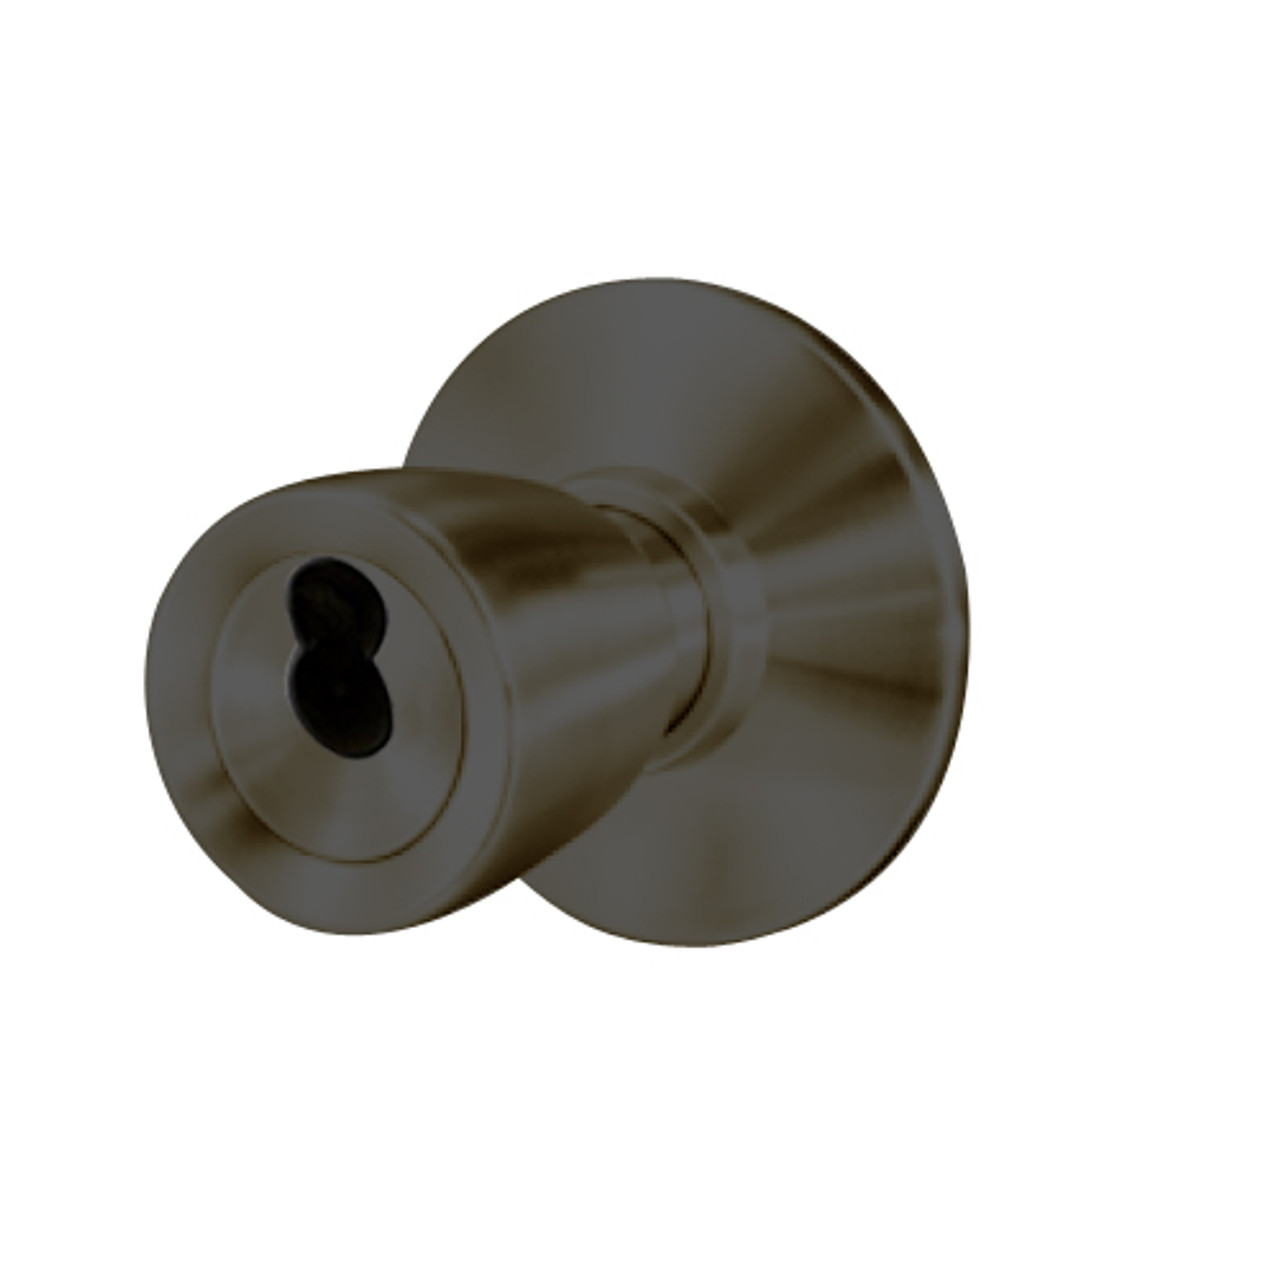 8K37YD6DSTK613 Best 8K Series Exit Heavy Duty Cylindrical Knob Locks with Tulip Style in Oil Rubbed Bronze